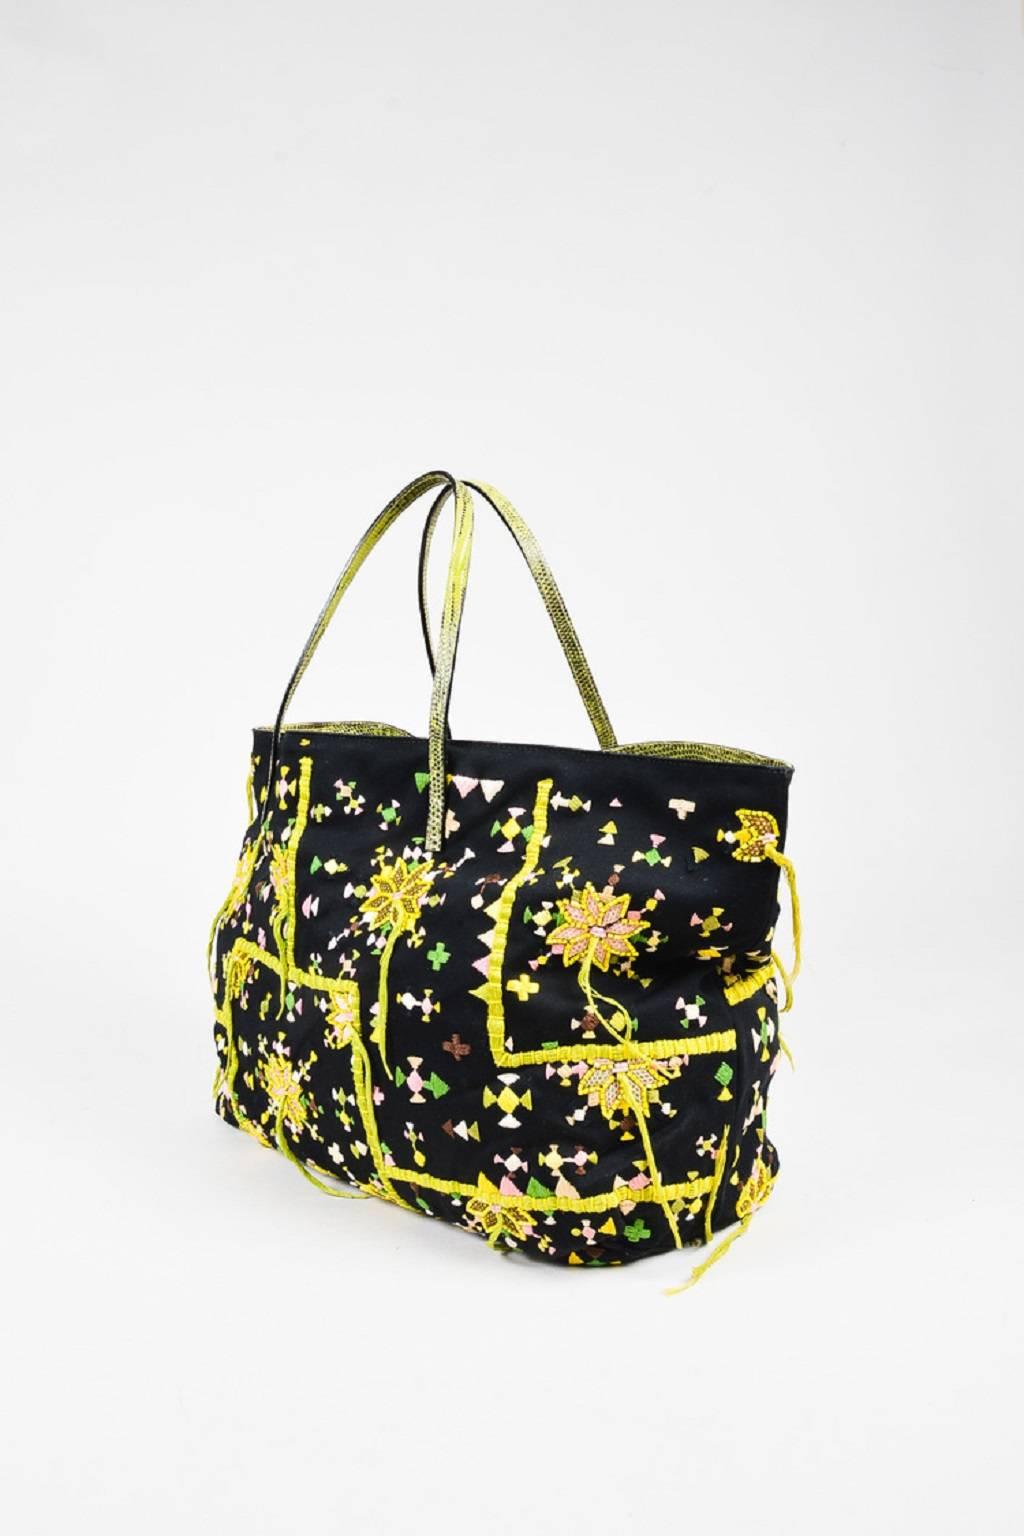 Color: Black,Green,Yellow,
Made In: Italy
Fabric Content: Textile; Trim: Genuine Lizard

Item Specifics & Details: Retails at $895. This limited edition Fendi tote bag is perfect for vacation or everyday use. Constructed of black fabric. Features